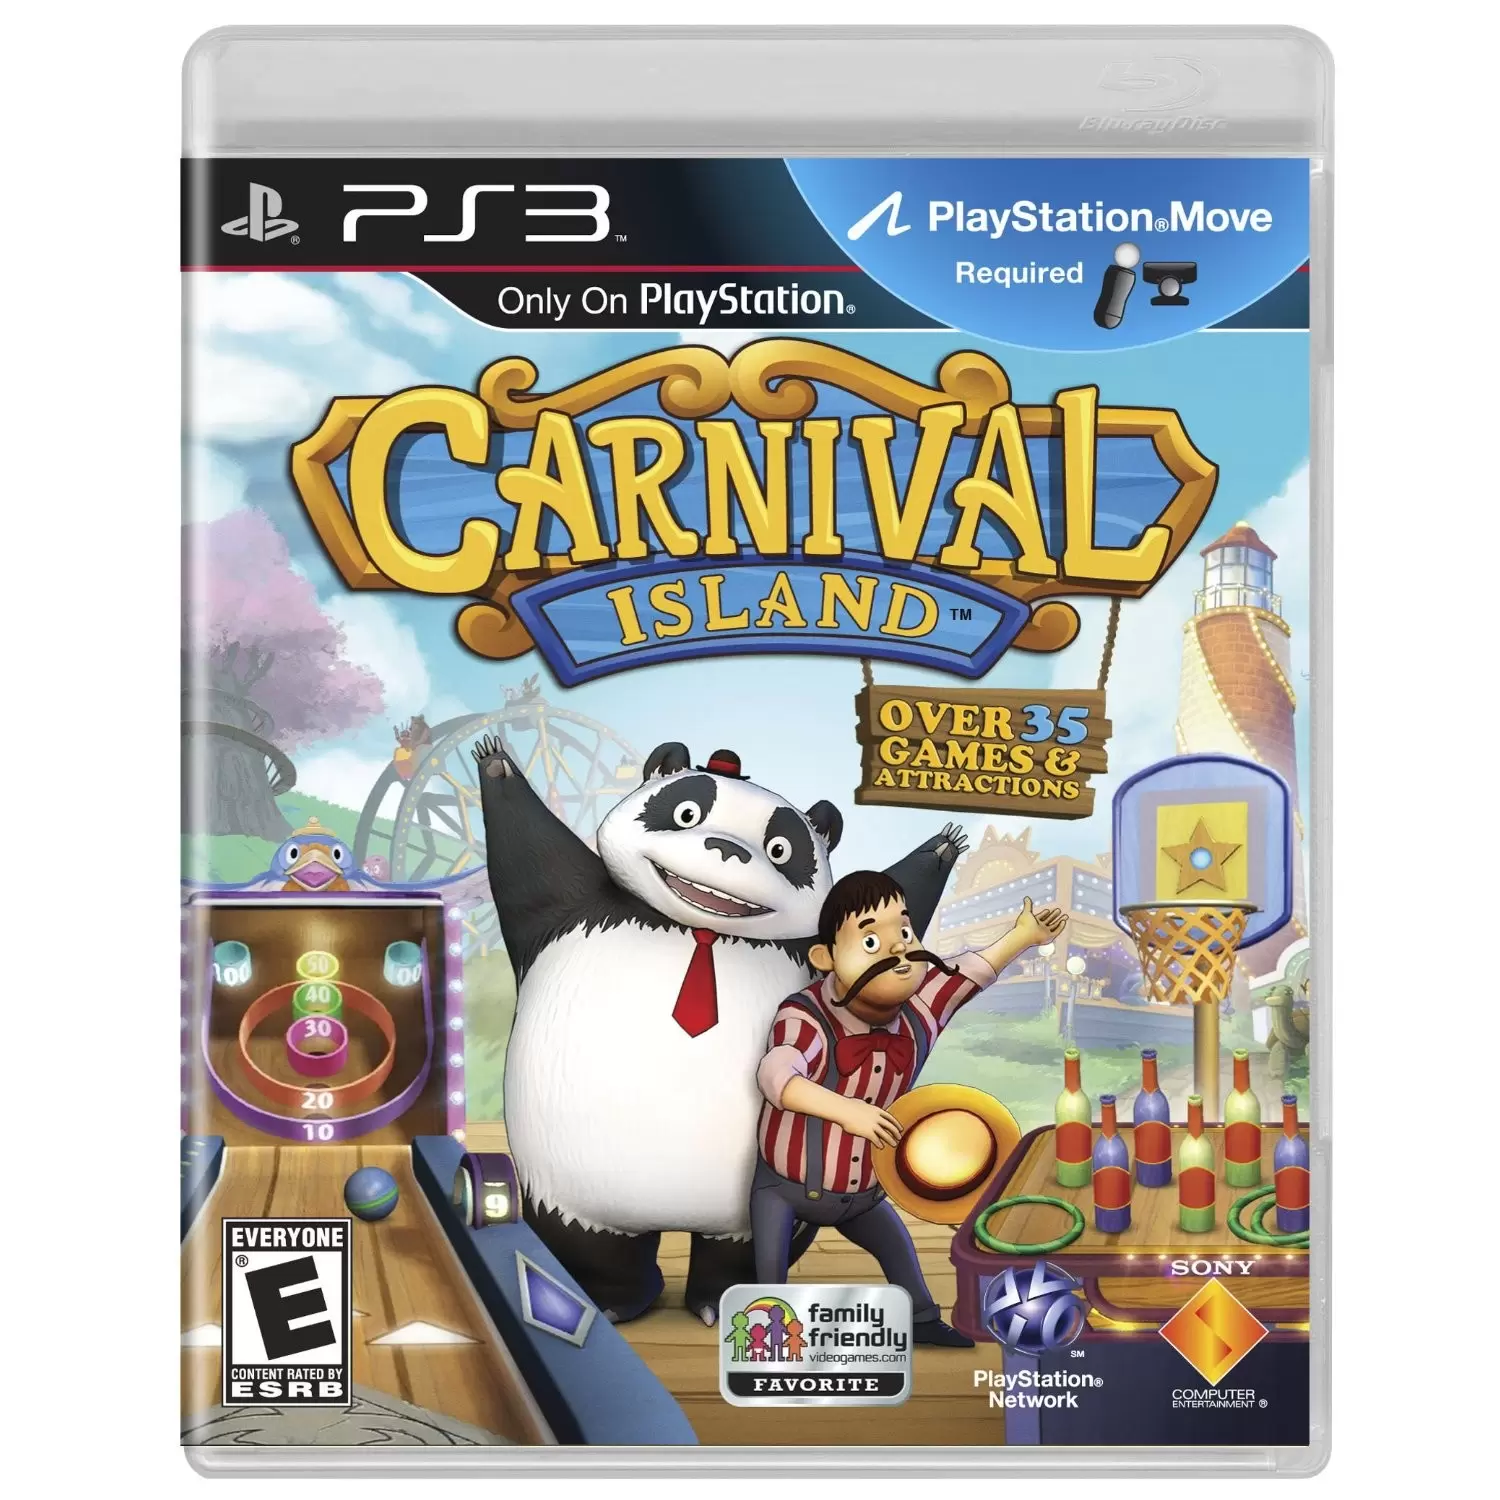 PS3 Games - Carnival Island